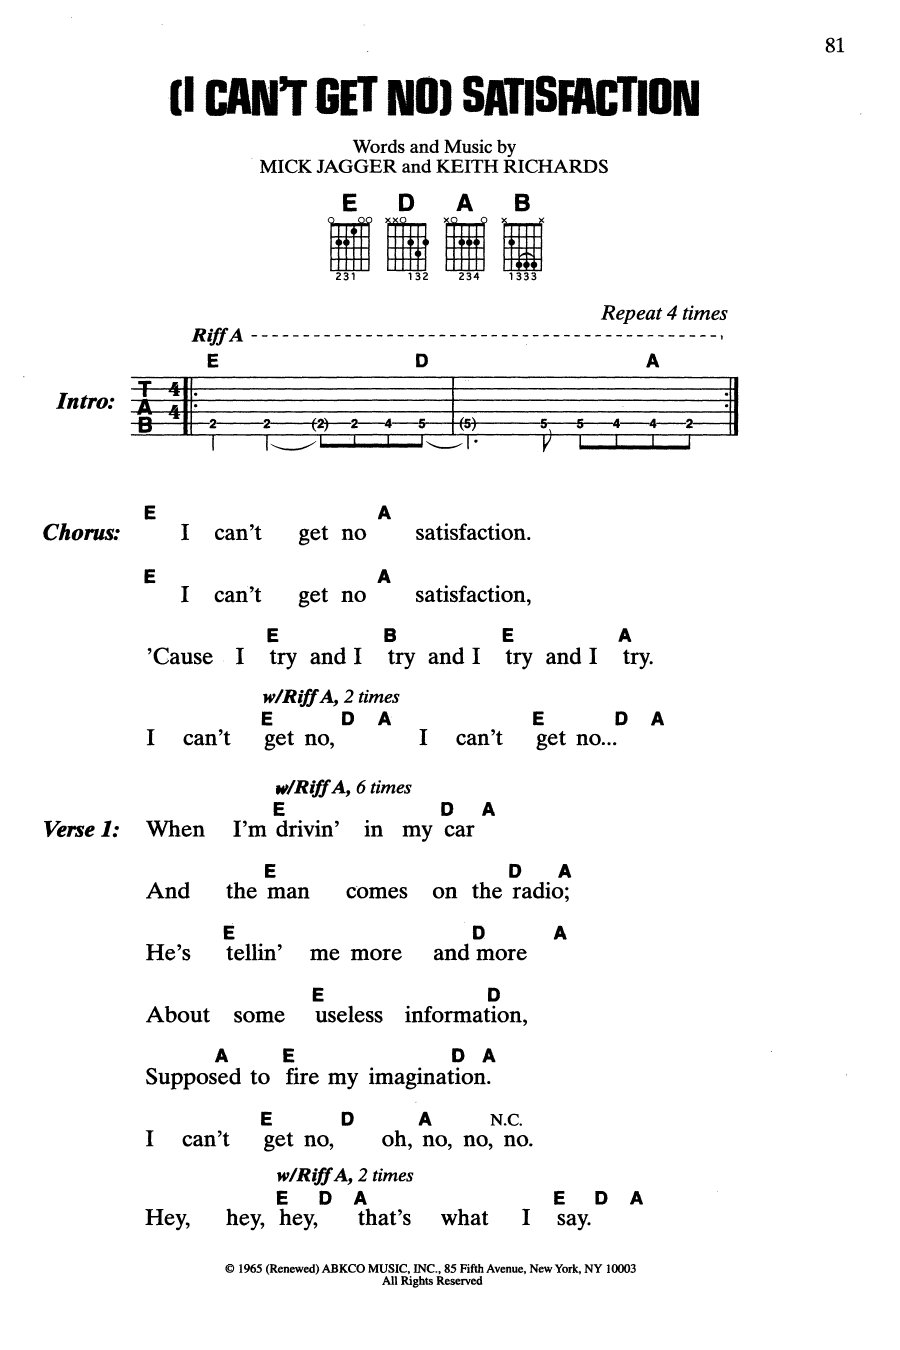 Download The Rolling Stones (I Can't Get No) Satisfaction Sheet Music